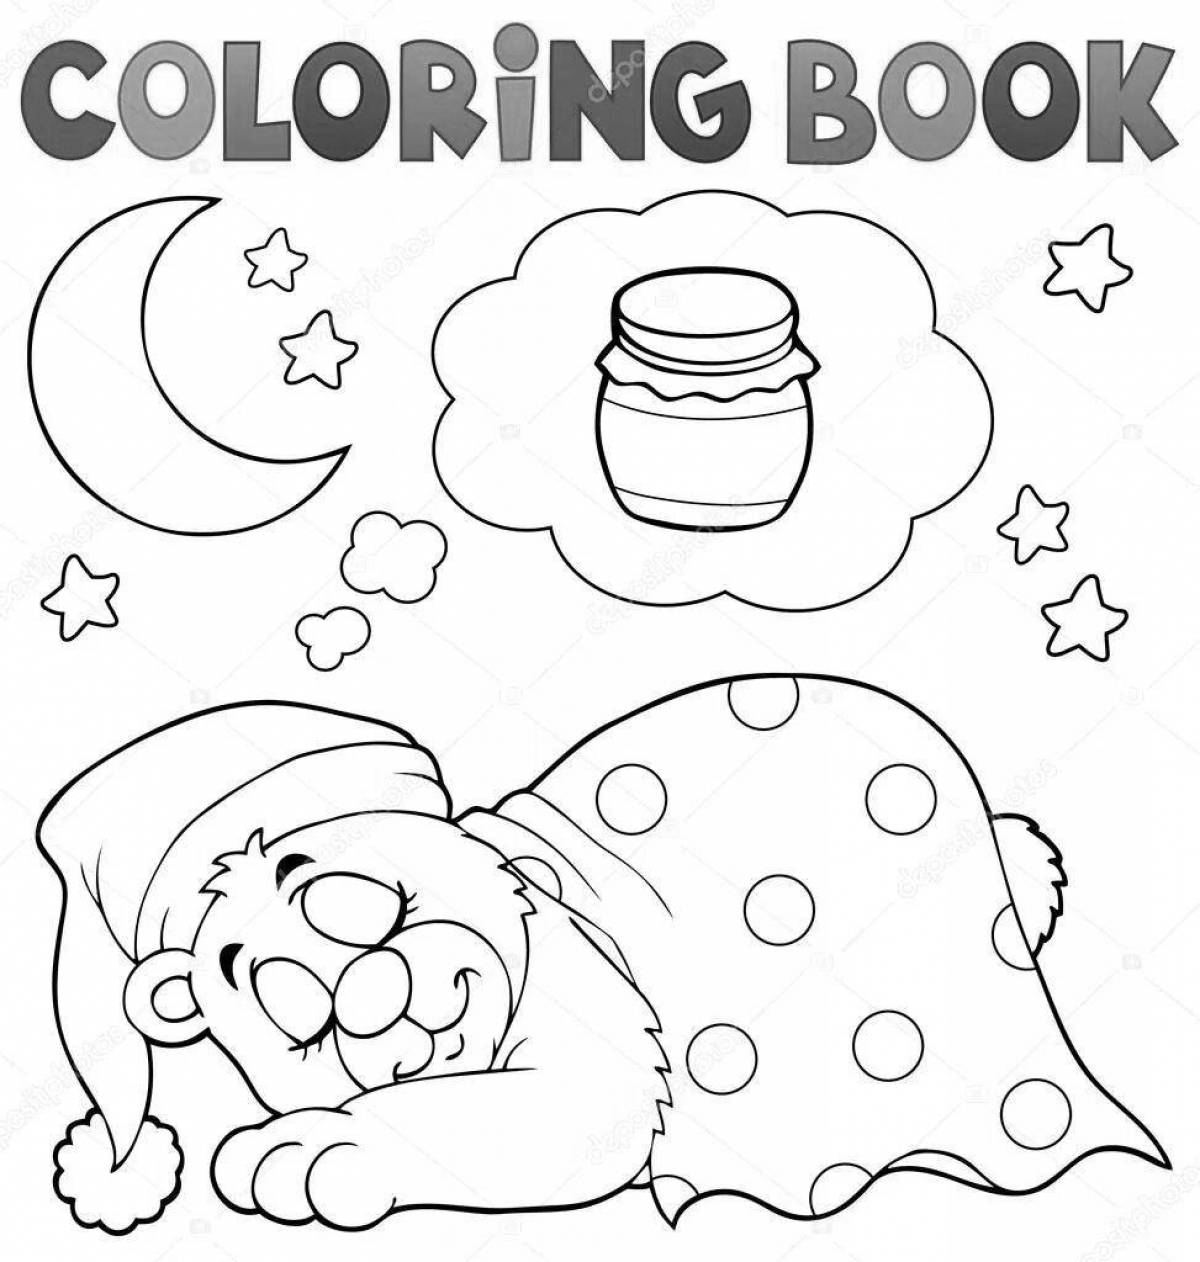 Bright bear in the den coloring for children